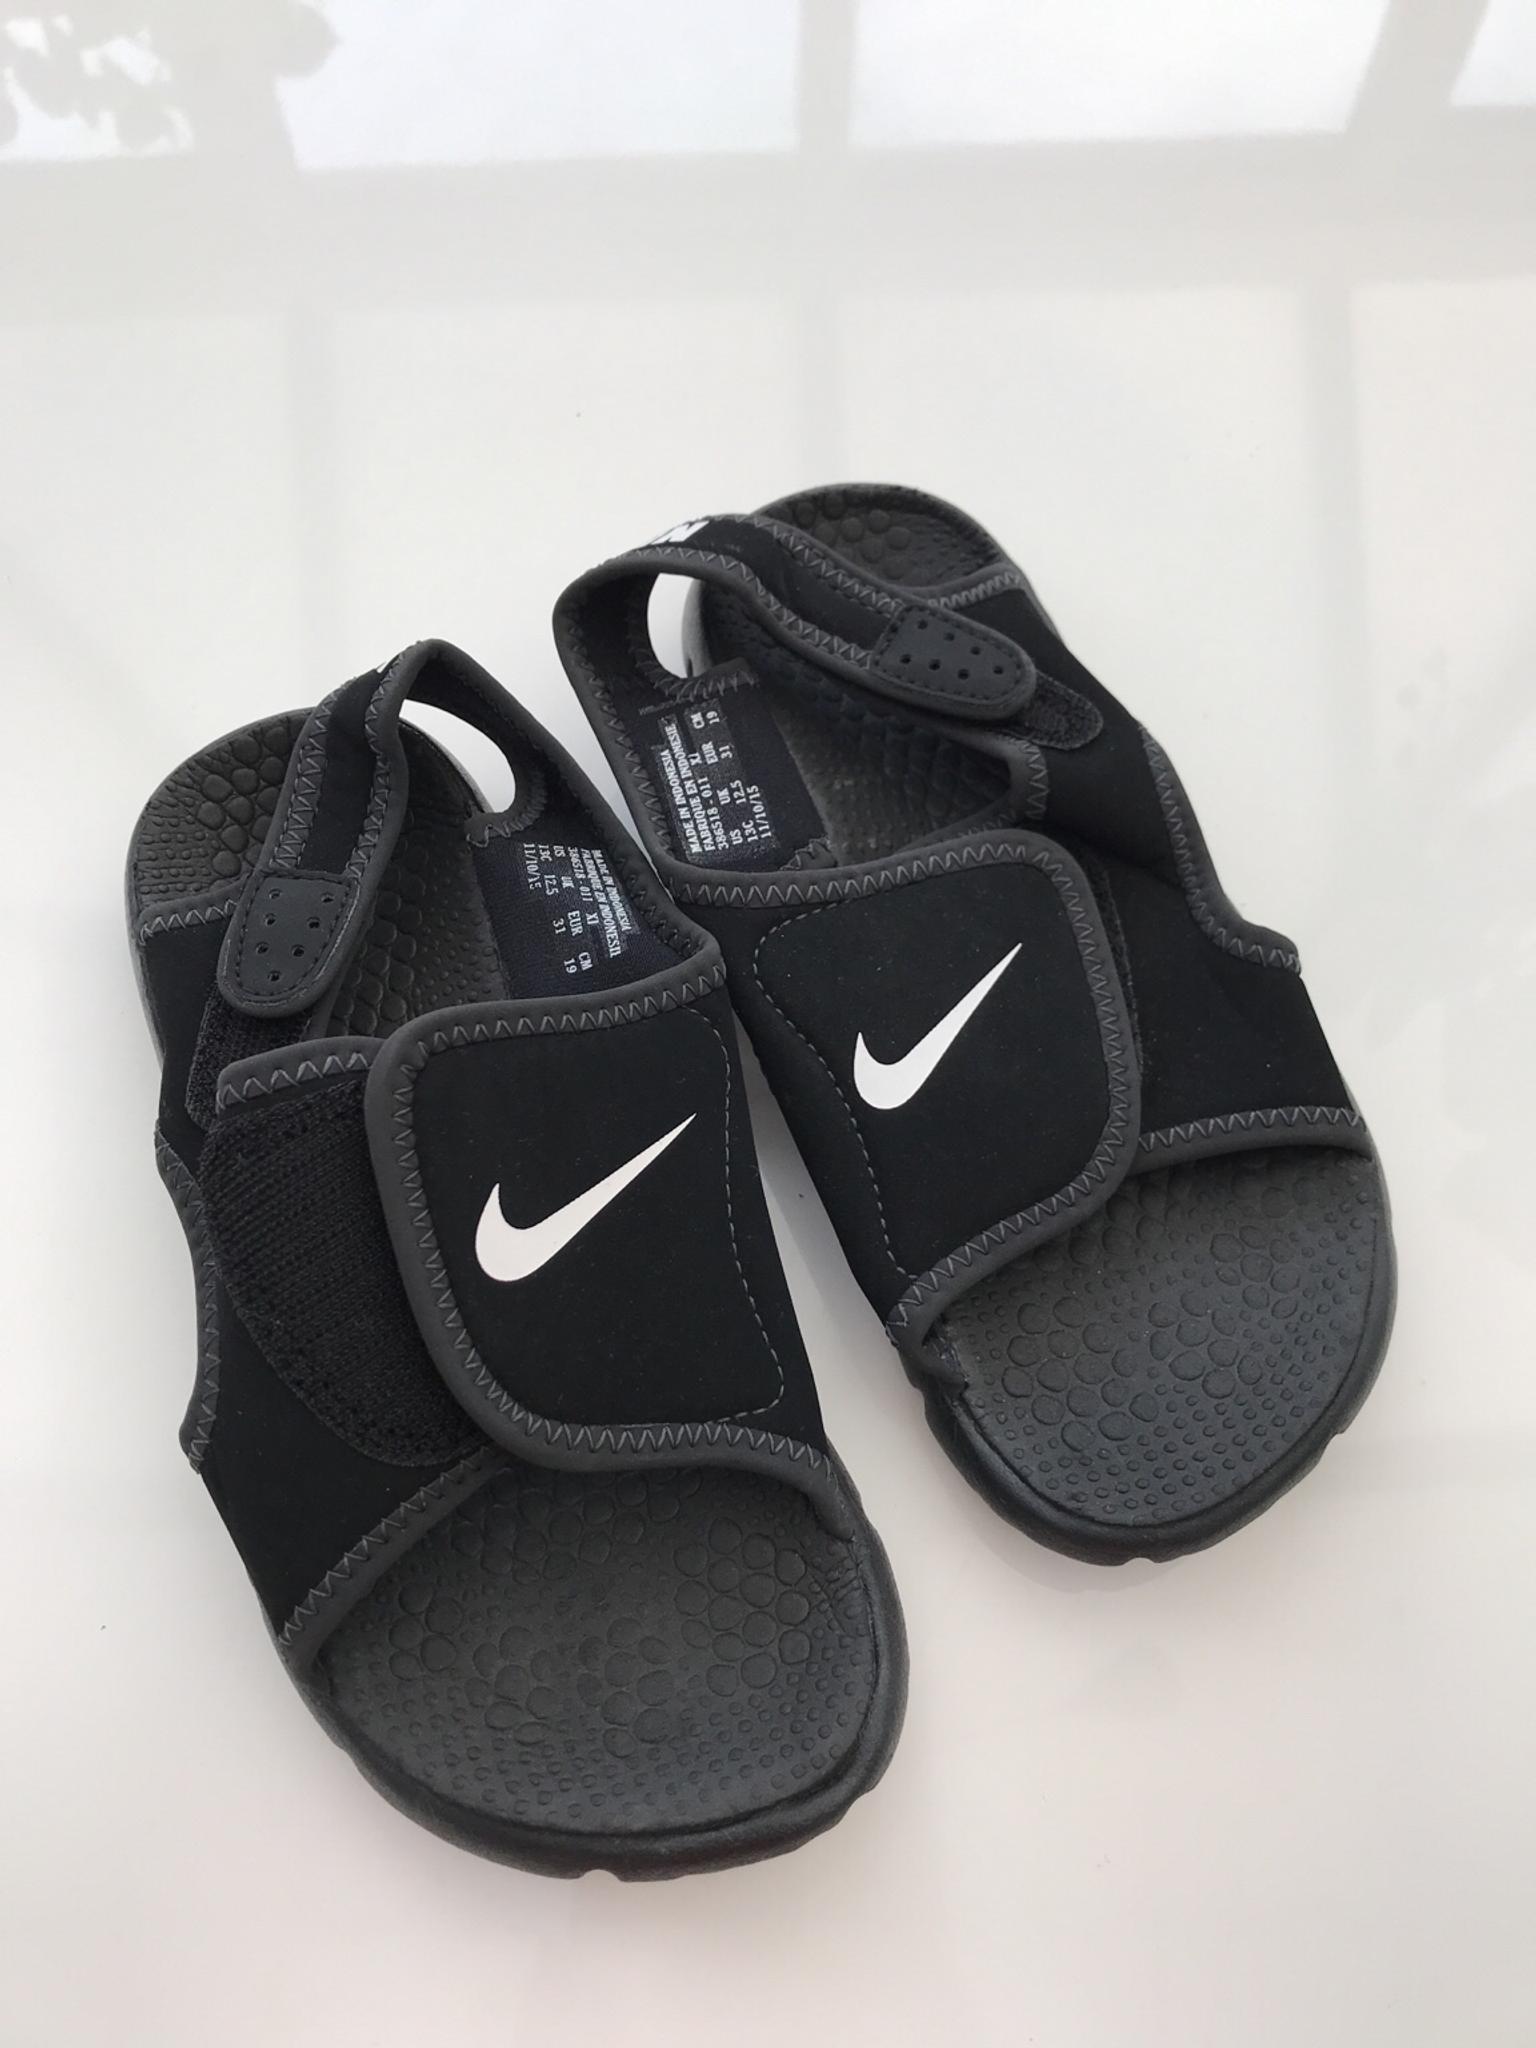 size 5 nike baby sandals